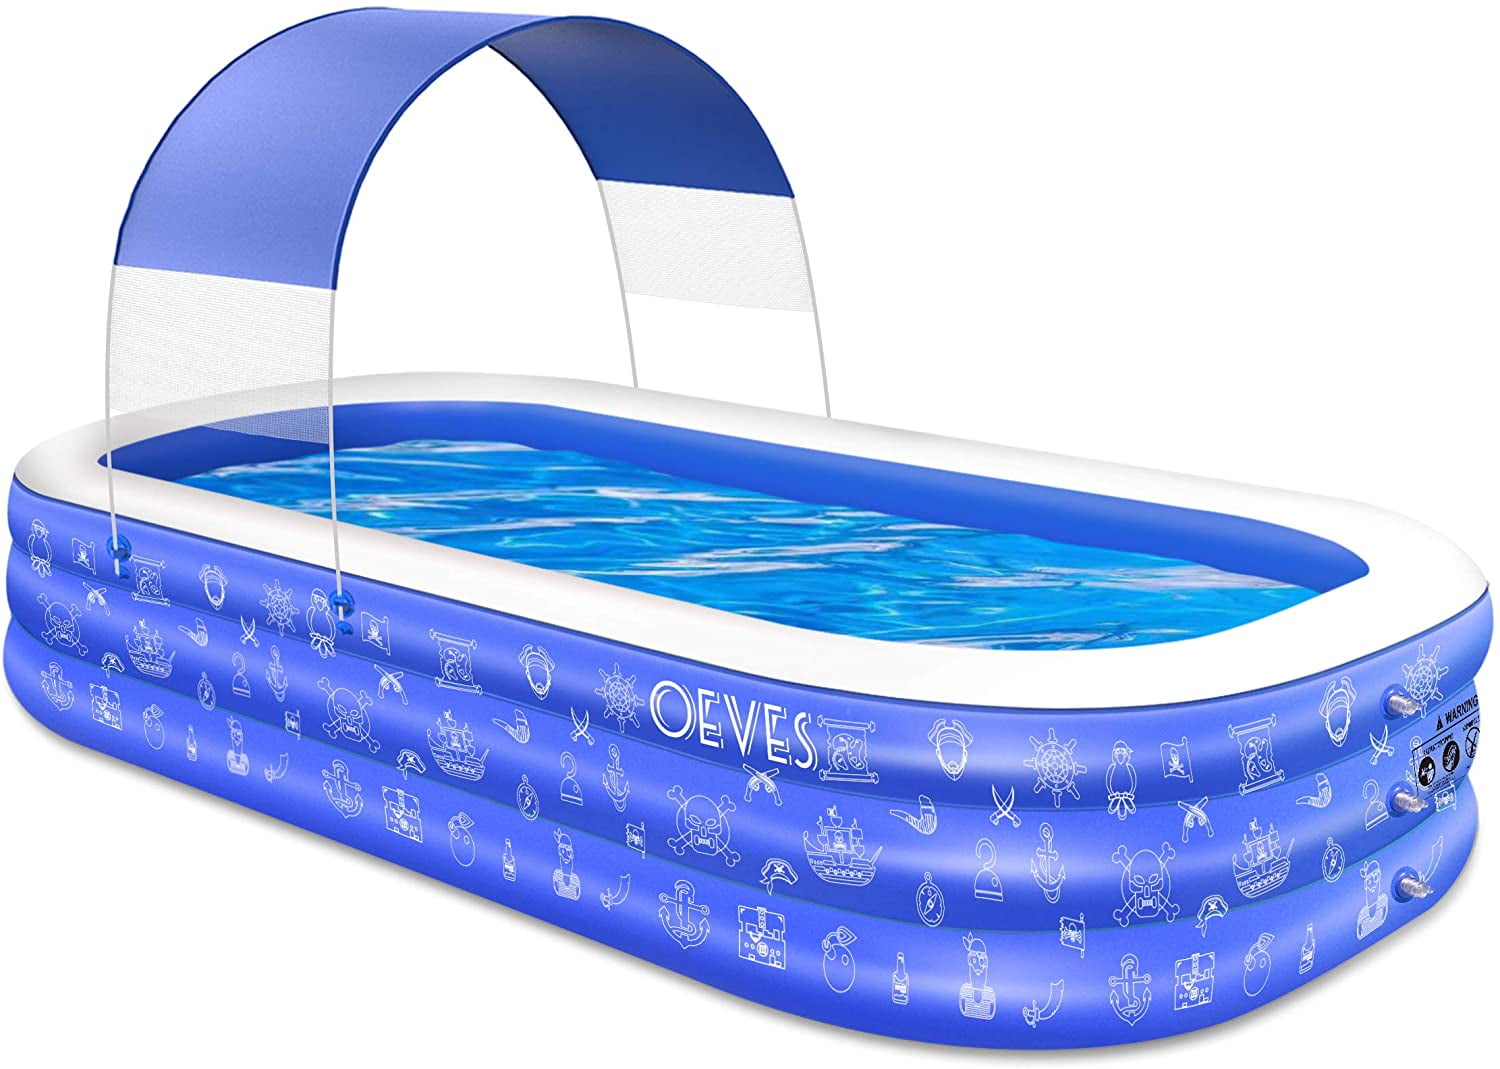 Details about   Kids Inflatable Swimming Pool Bath Tub Safety Shower Portable Paddling Pool 50'' 